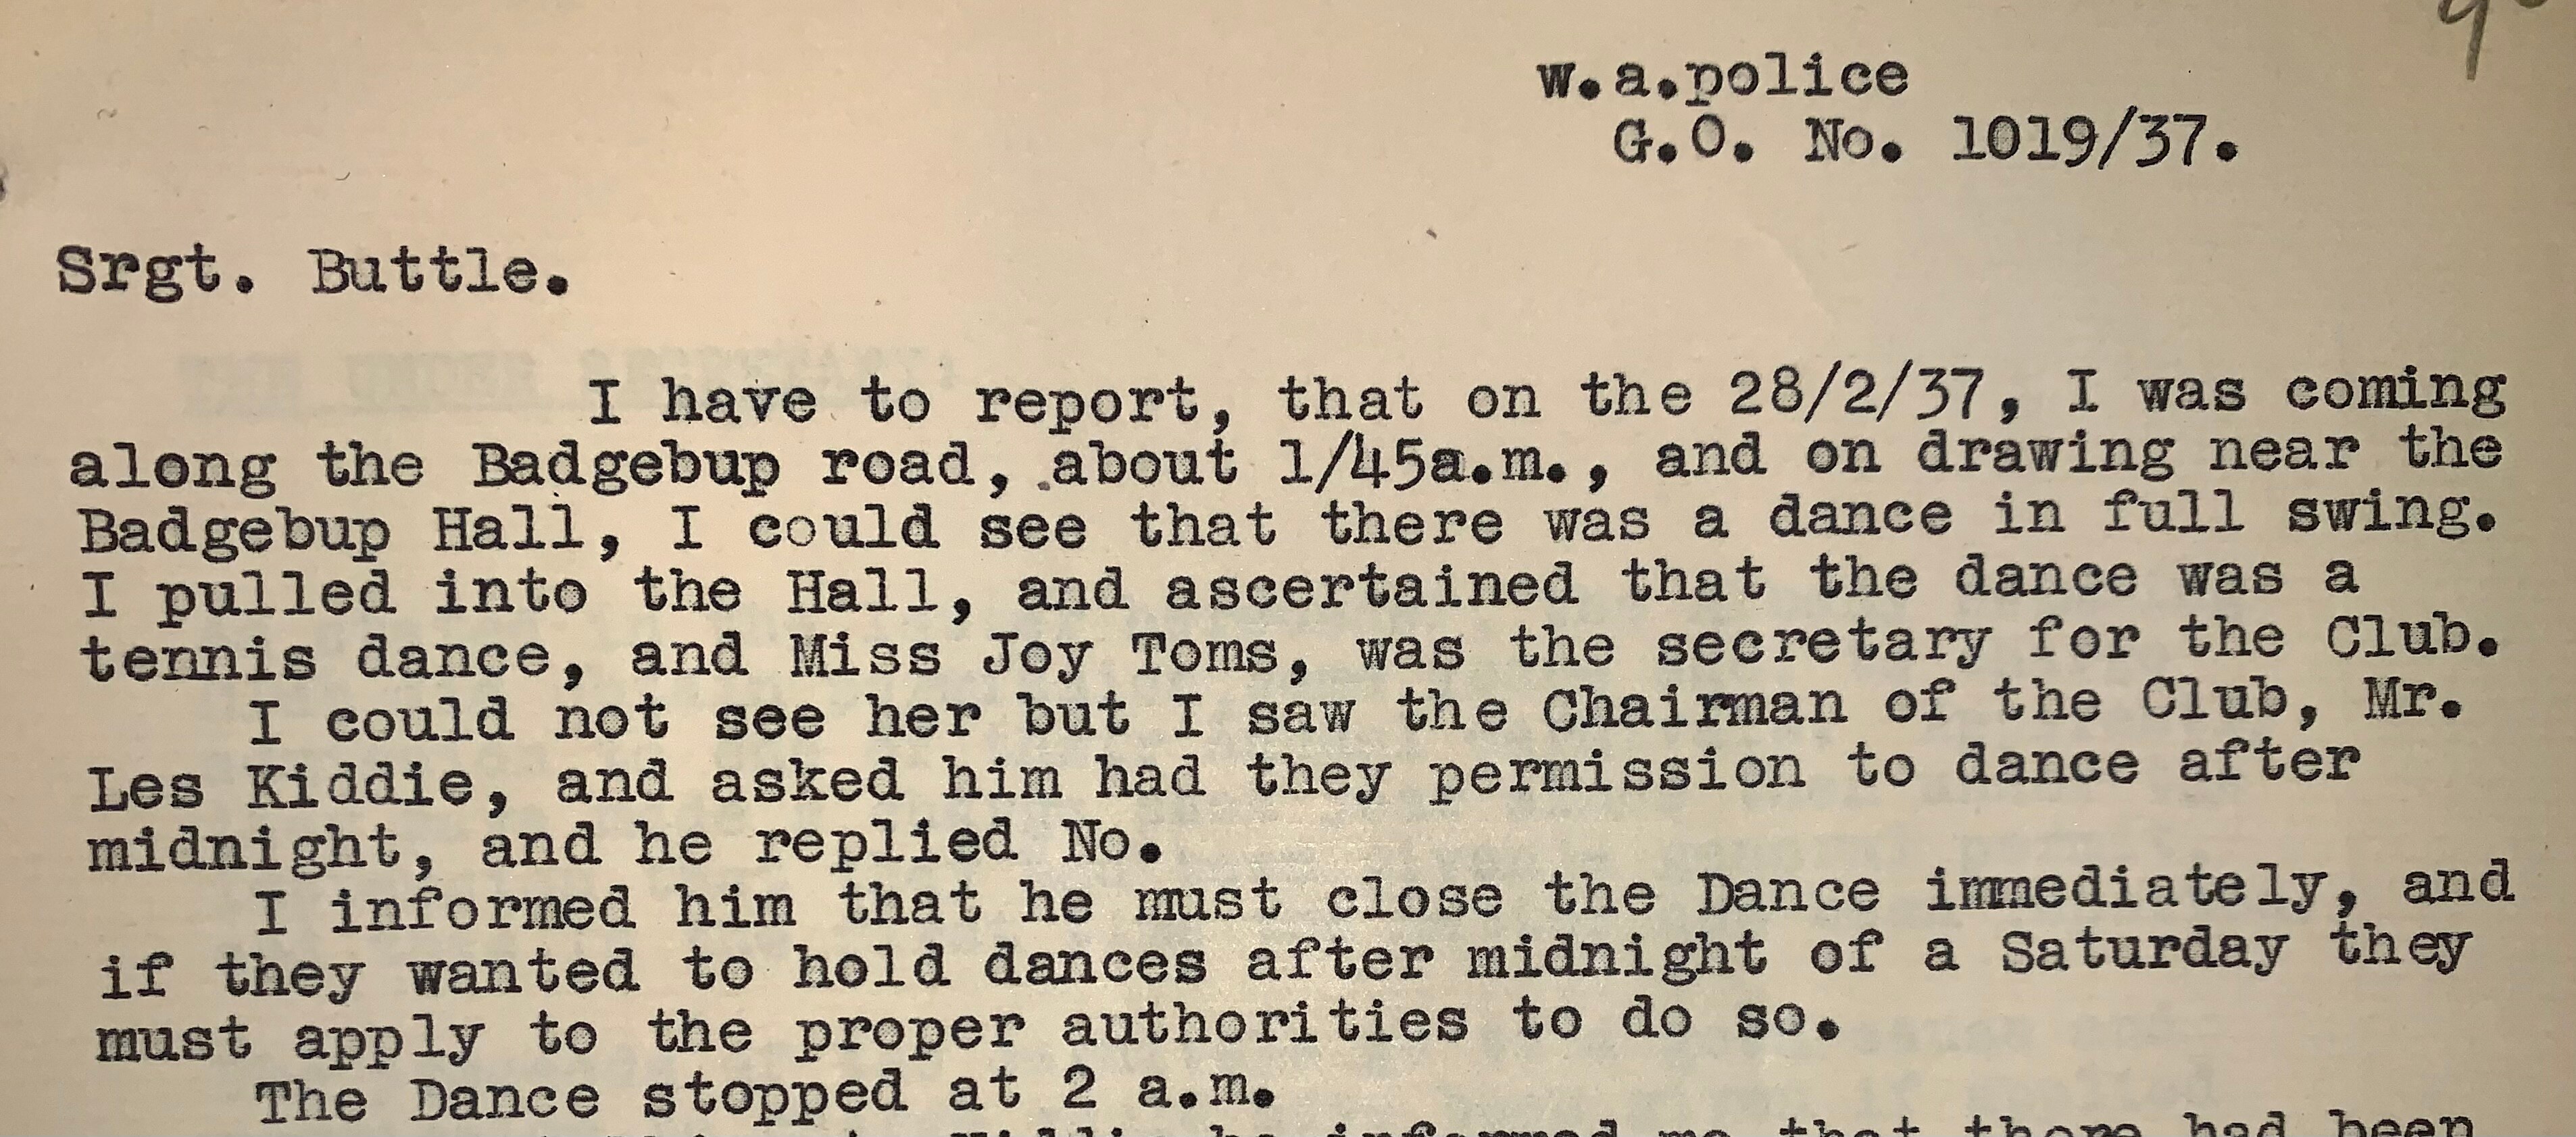 WA police report from 1937 on unauthorised dancing